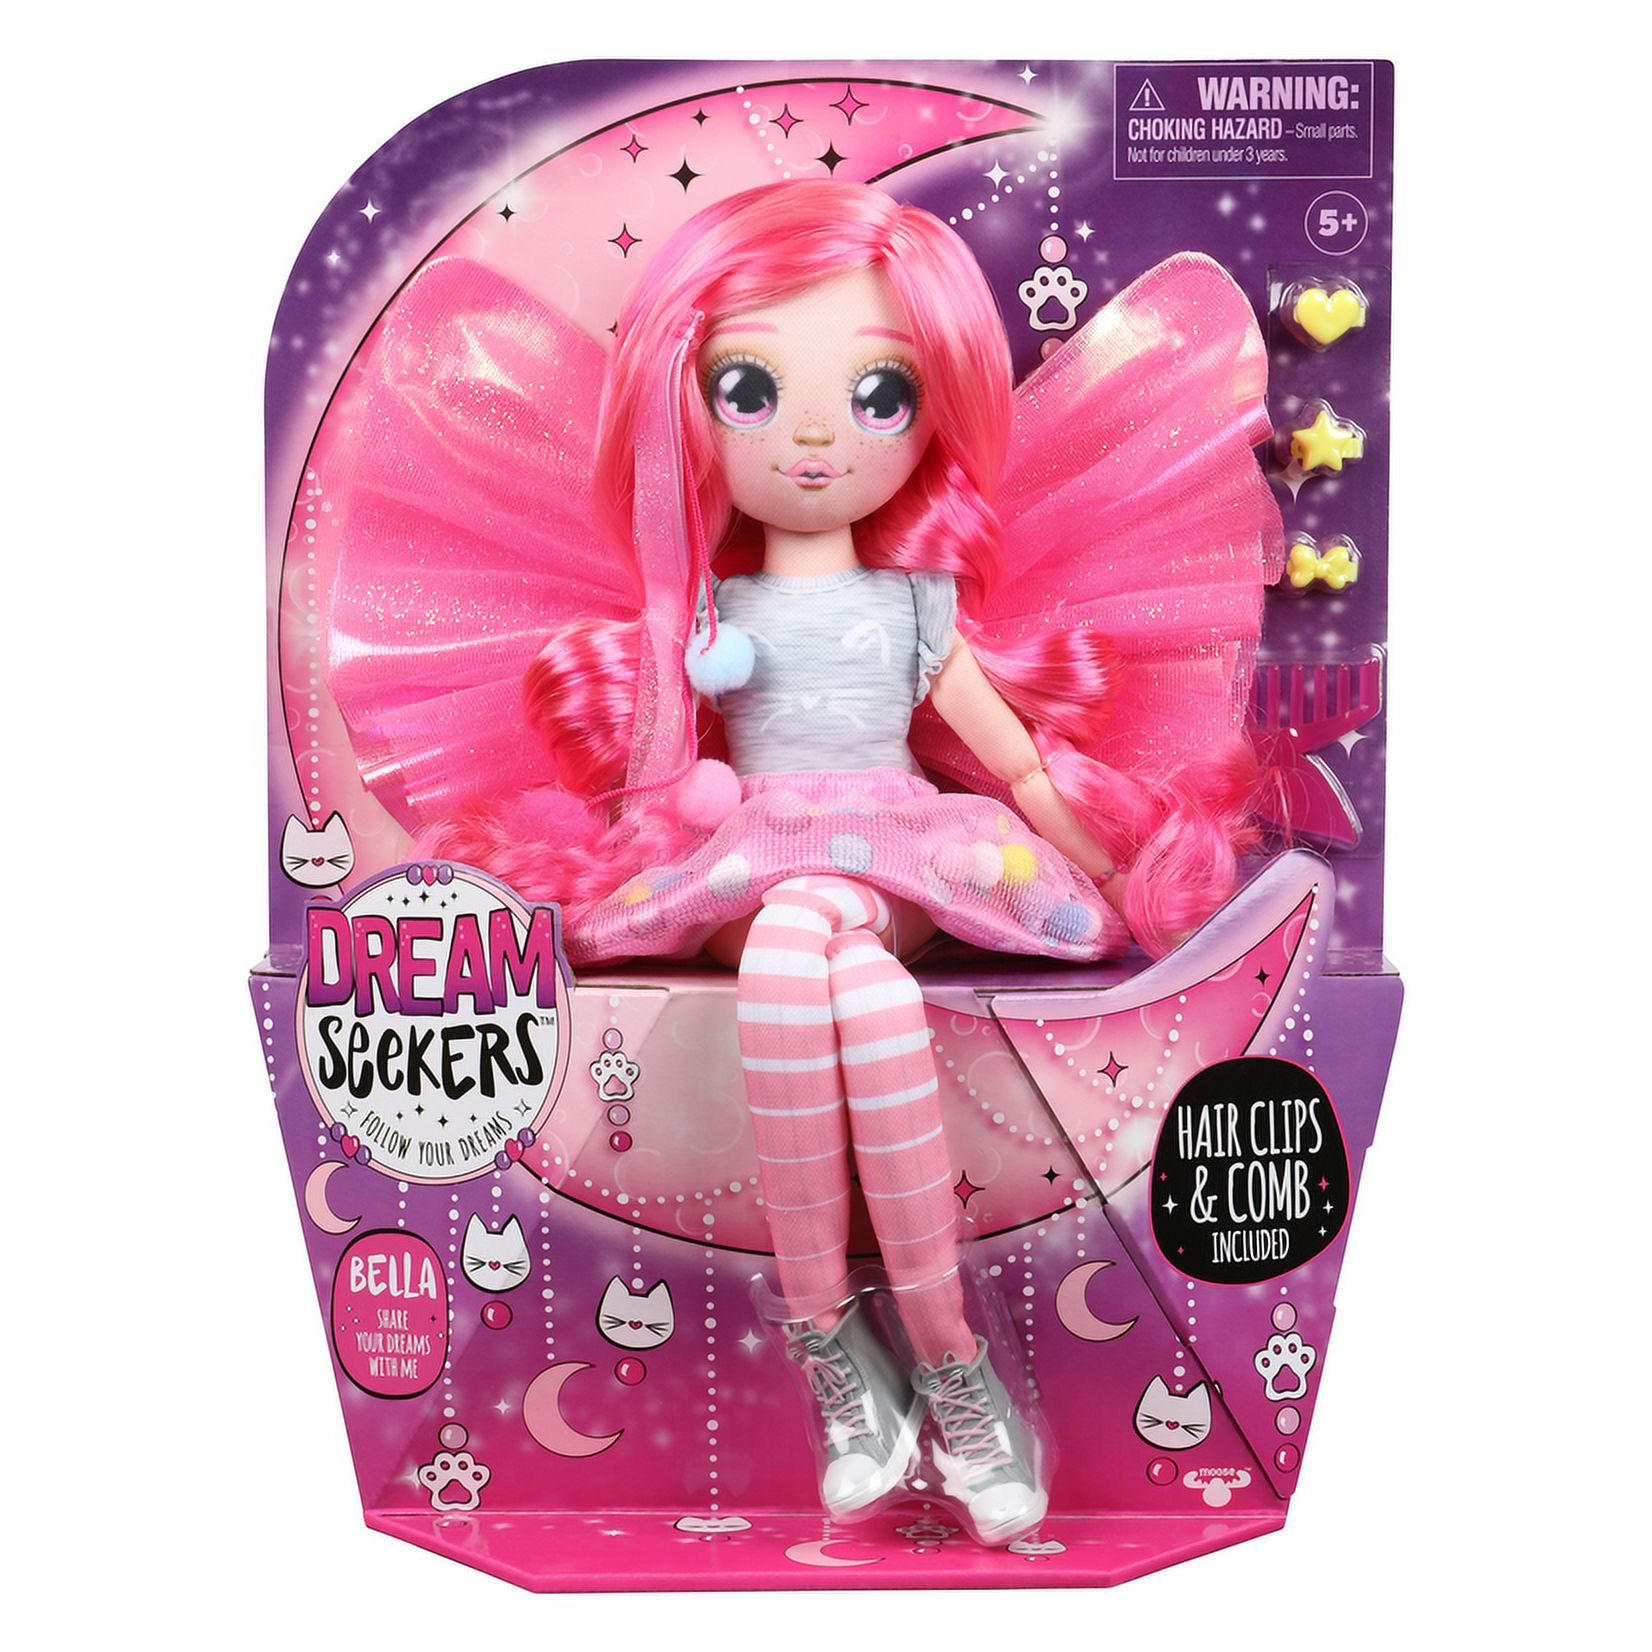 Dream Seekers Doll Single Pack – 1Pc Toy - image 4 of 8